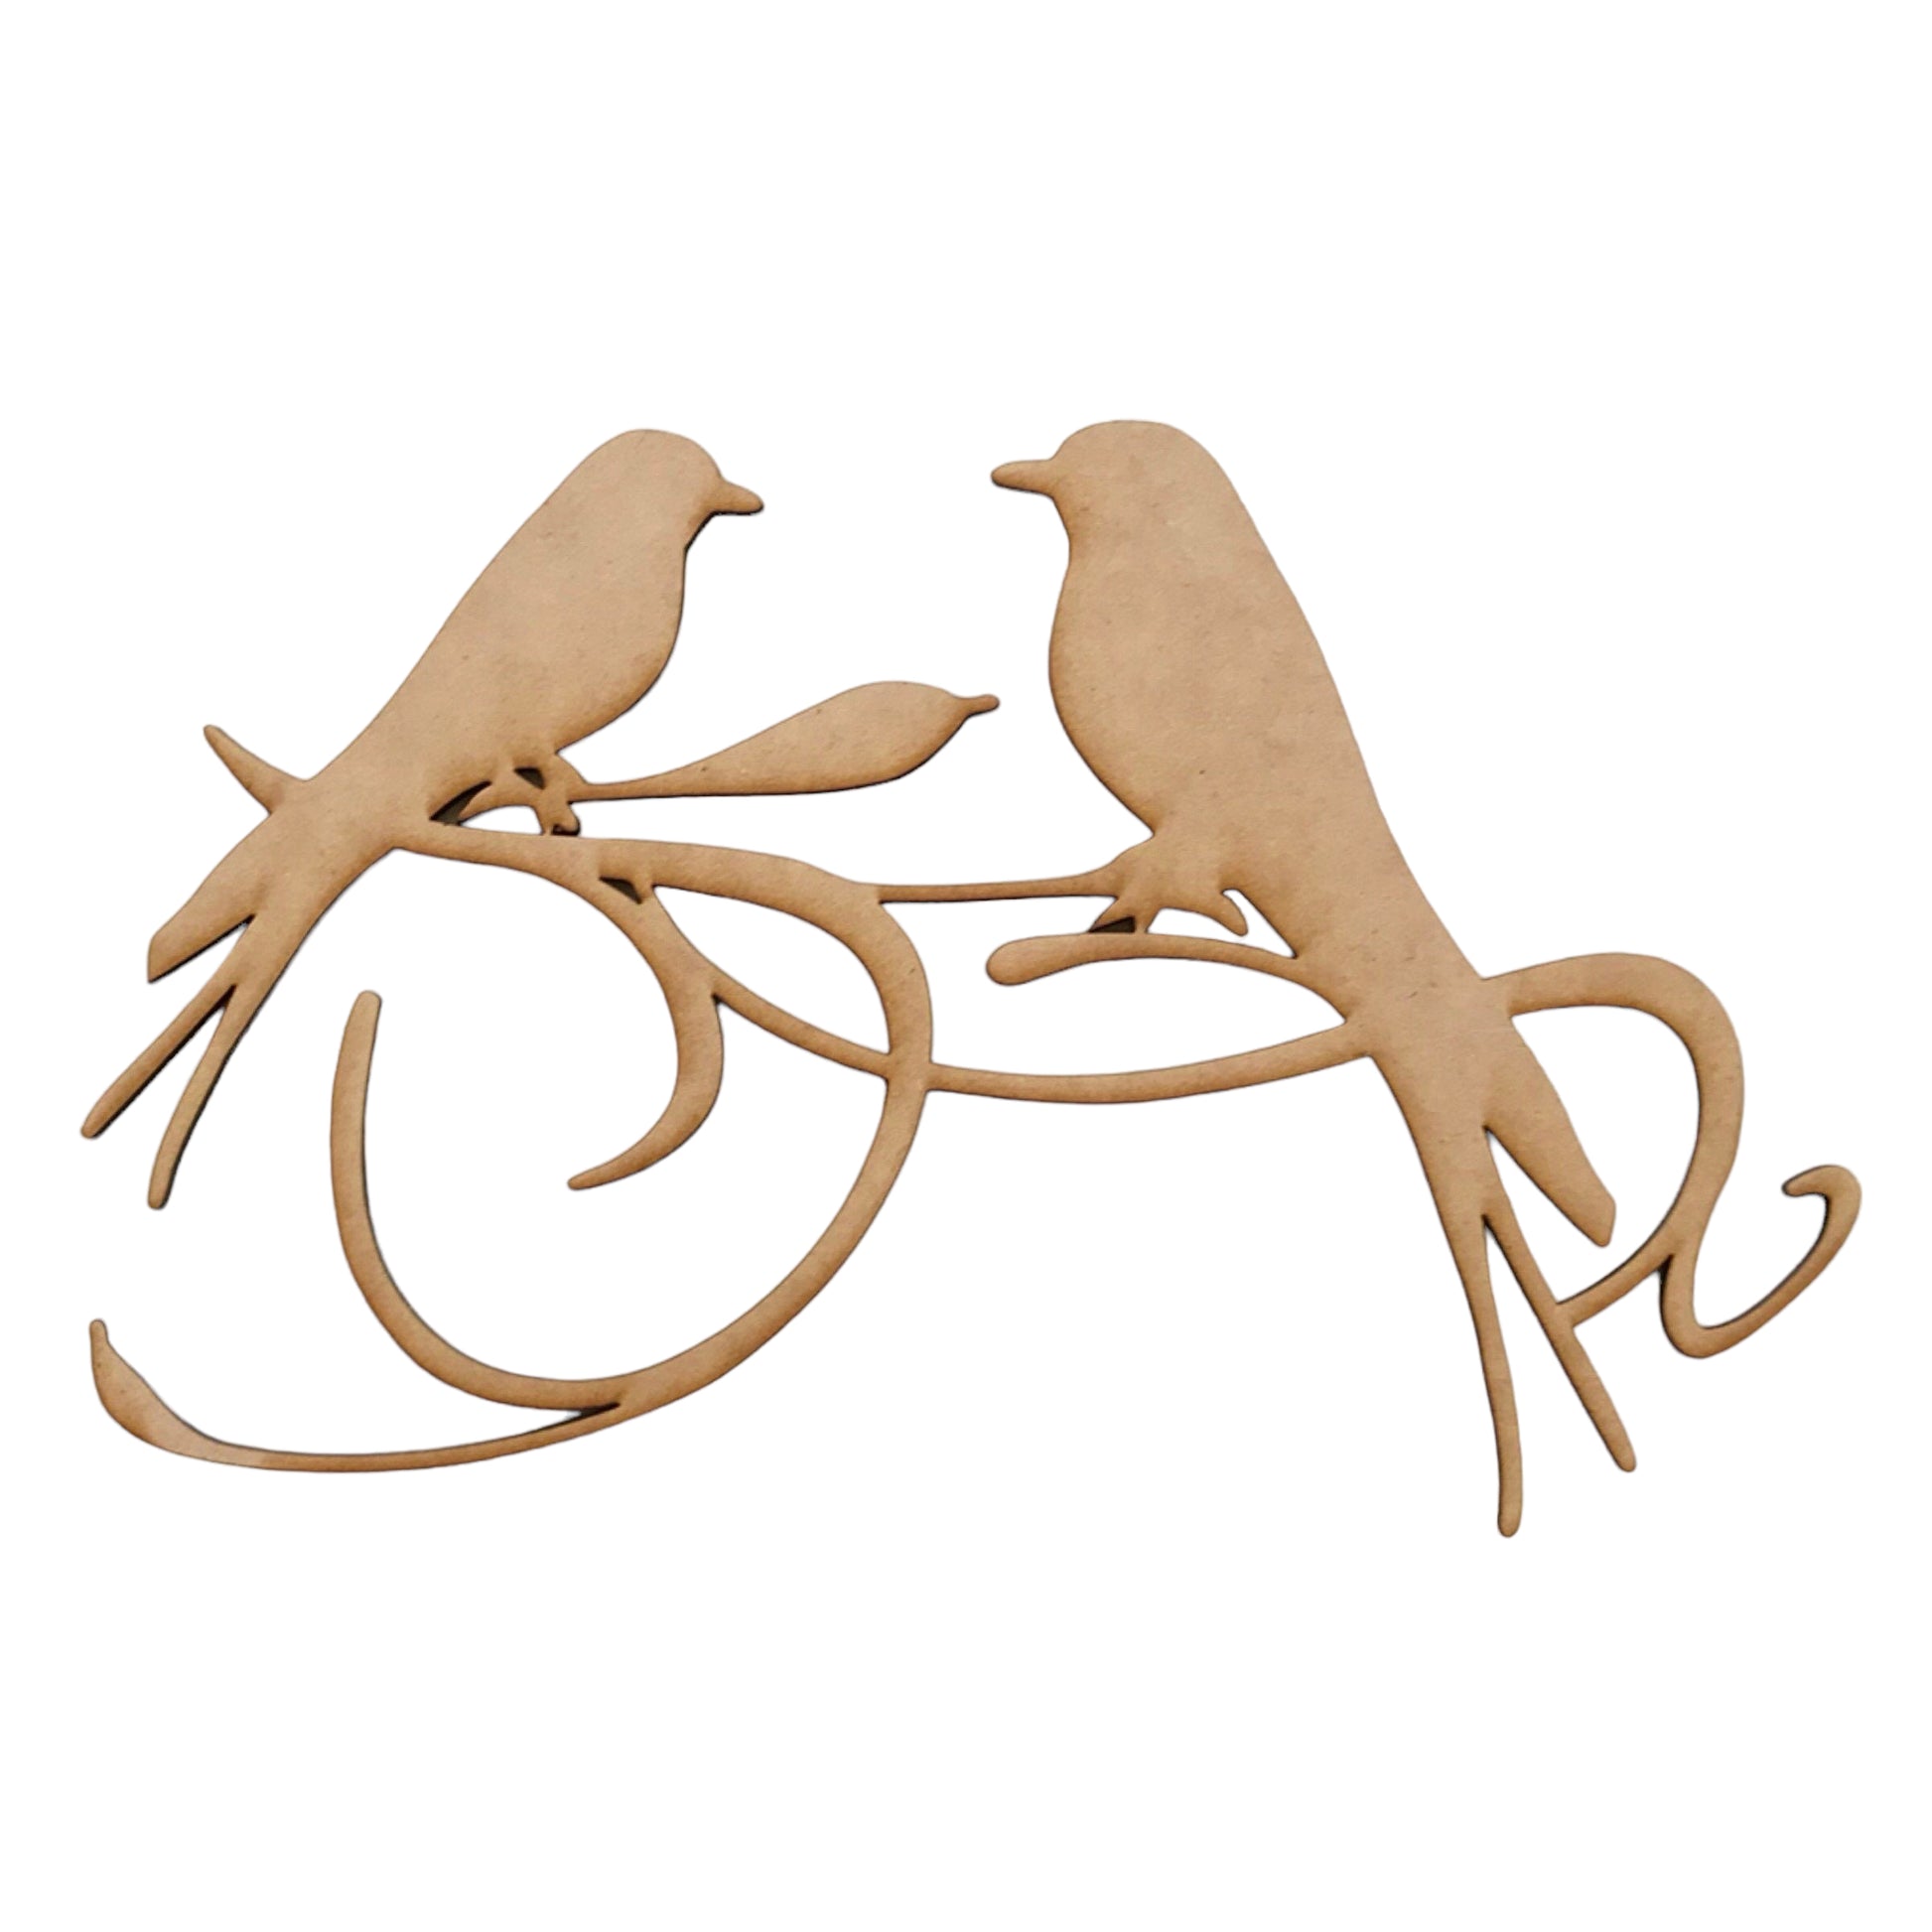 Two Birds Scroll MDF DIY Raw Cut Out Art Craft Decor - The Renmy Store Homewares & Gifts 